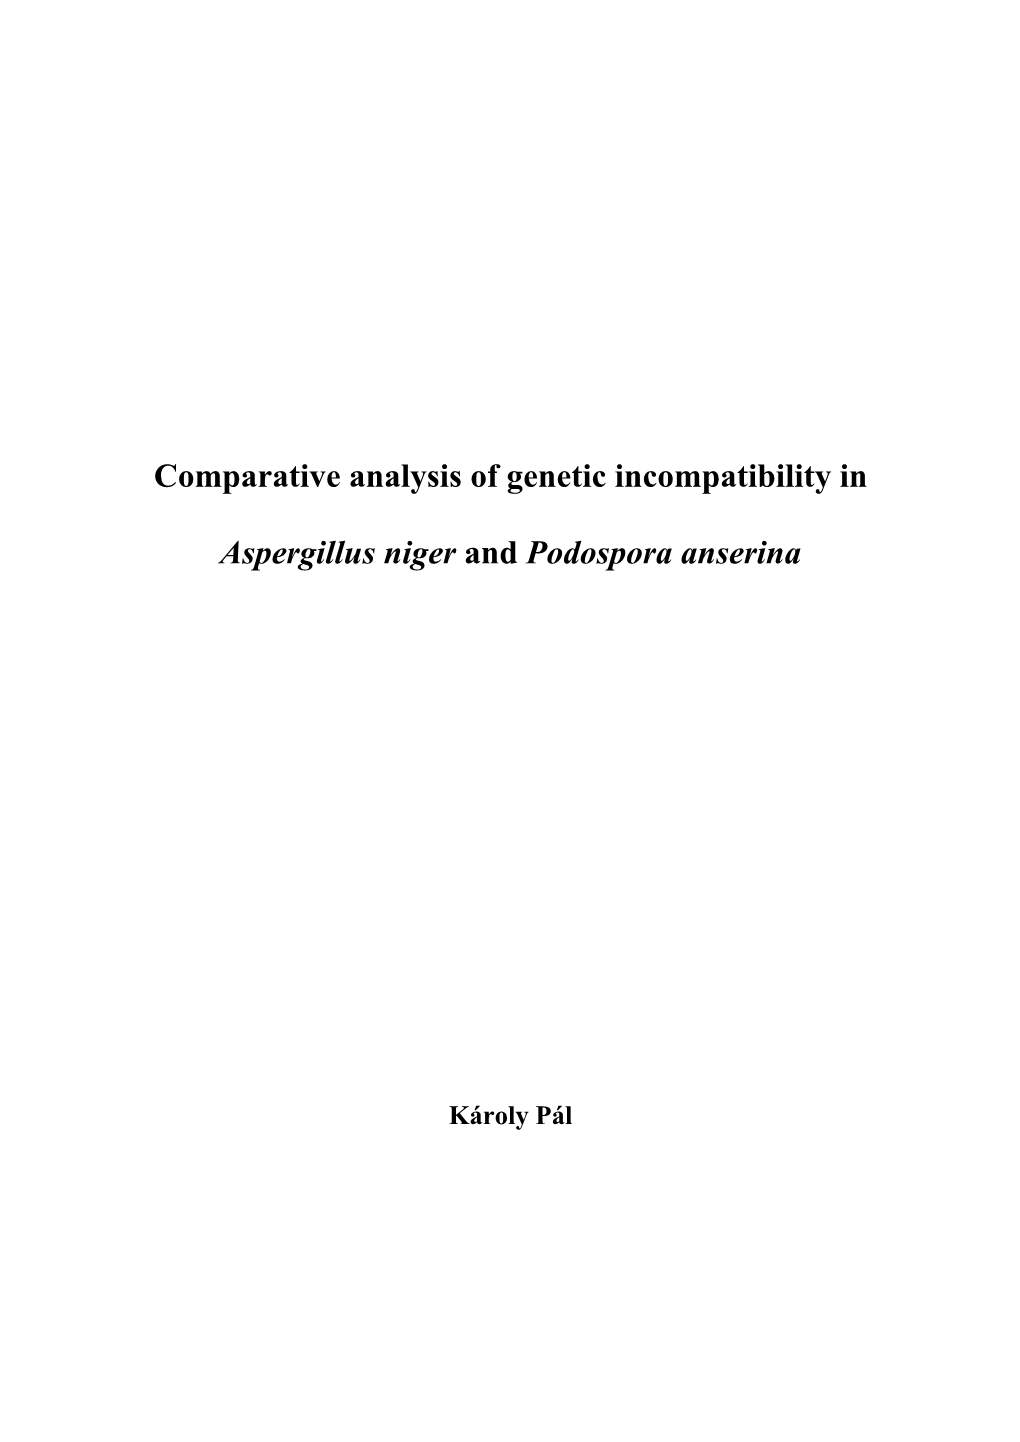 Comparative Analysis of Genetic Incompatibility in Aspergillus Niger and Podospora Anserina